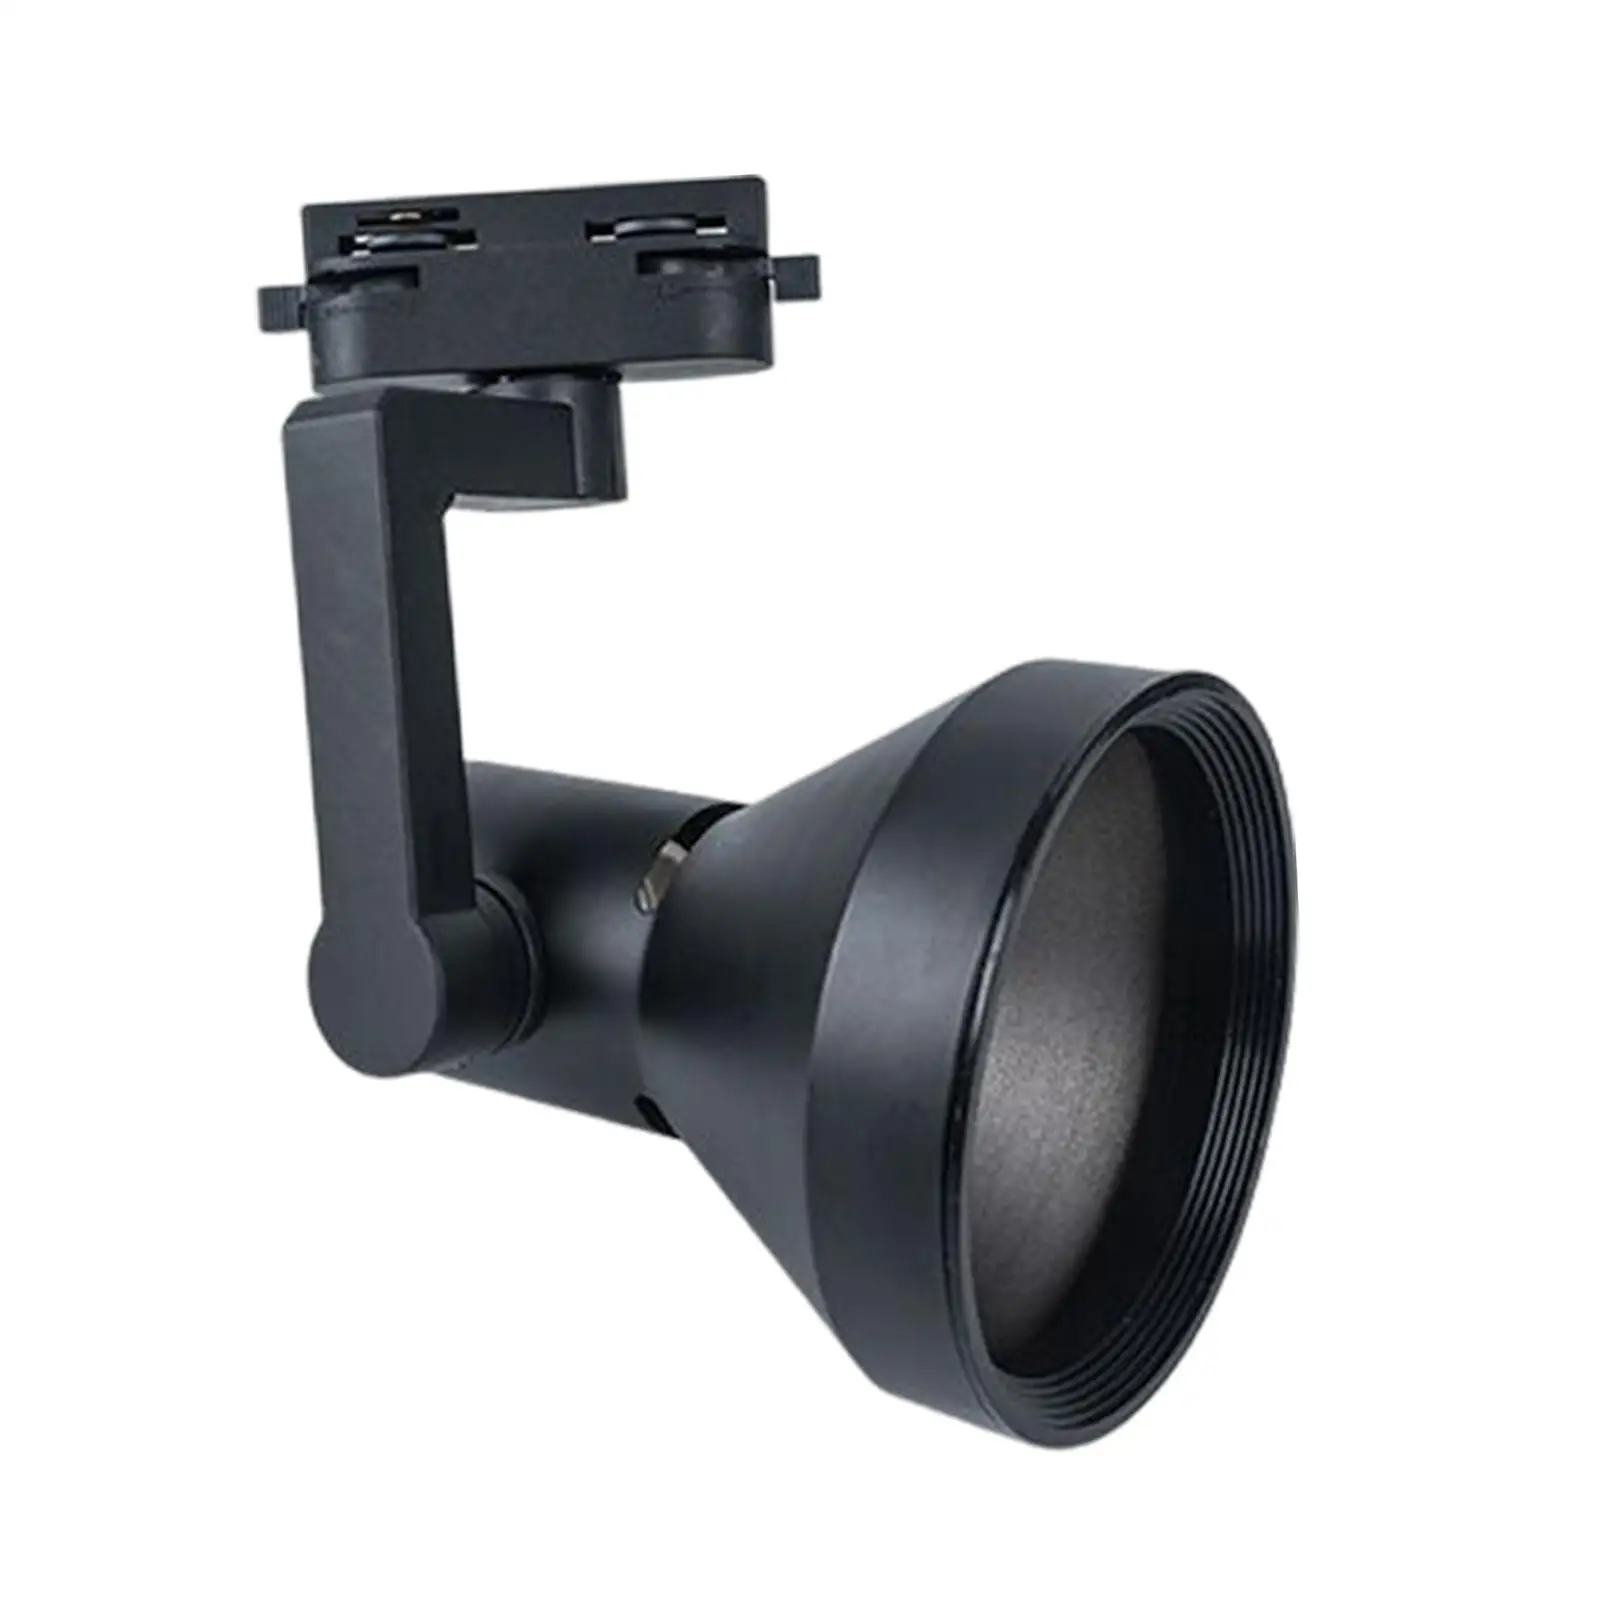 Par30 LED Track Light Shade Cover Bracket E27 Base Black Easily Install for Hotel Supermarket and Office Painted Surface Durable